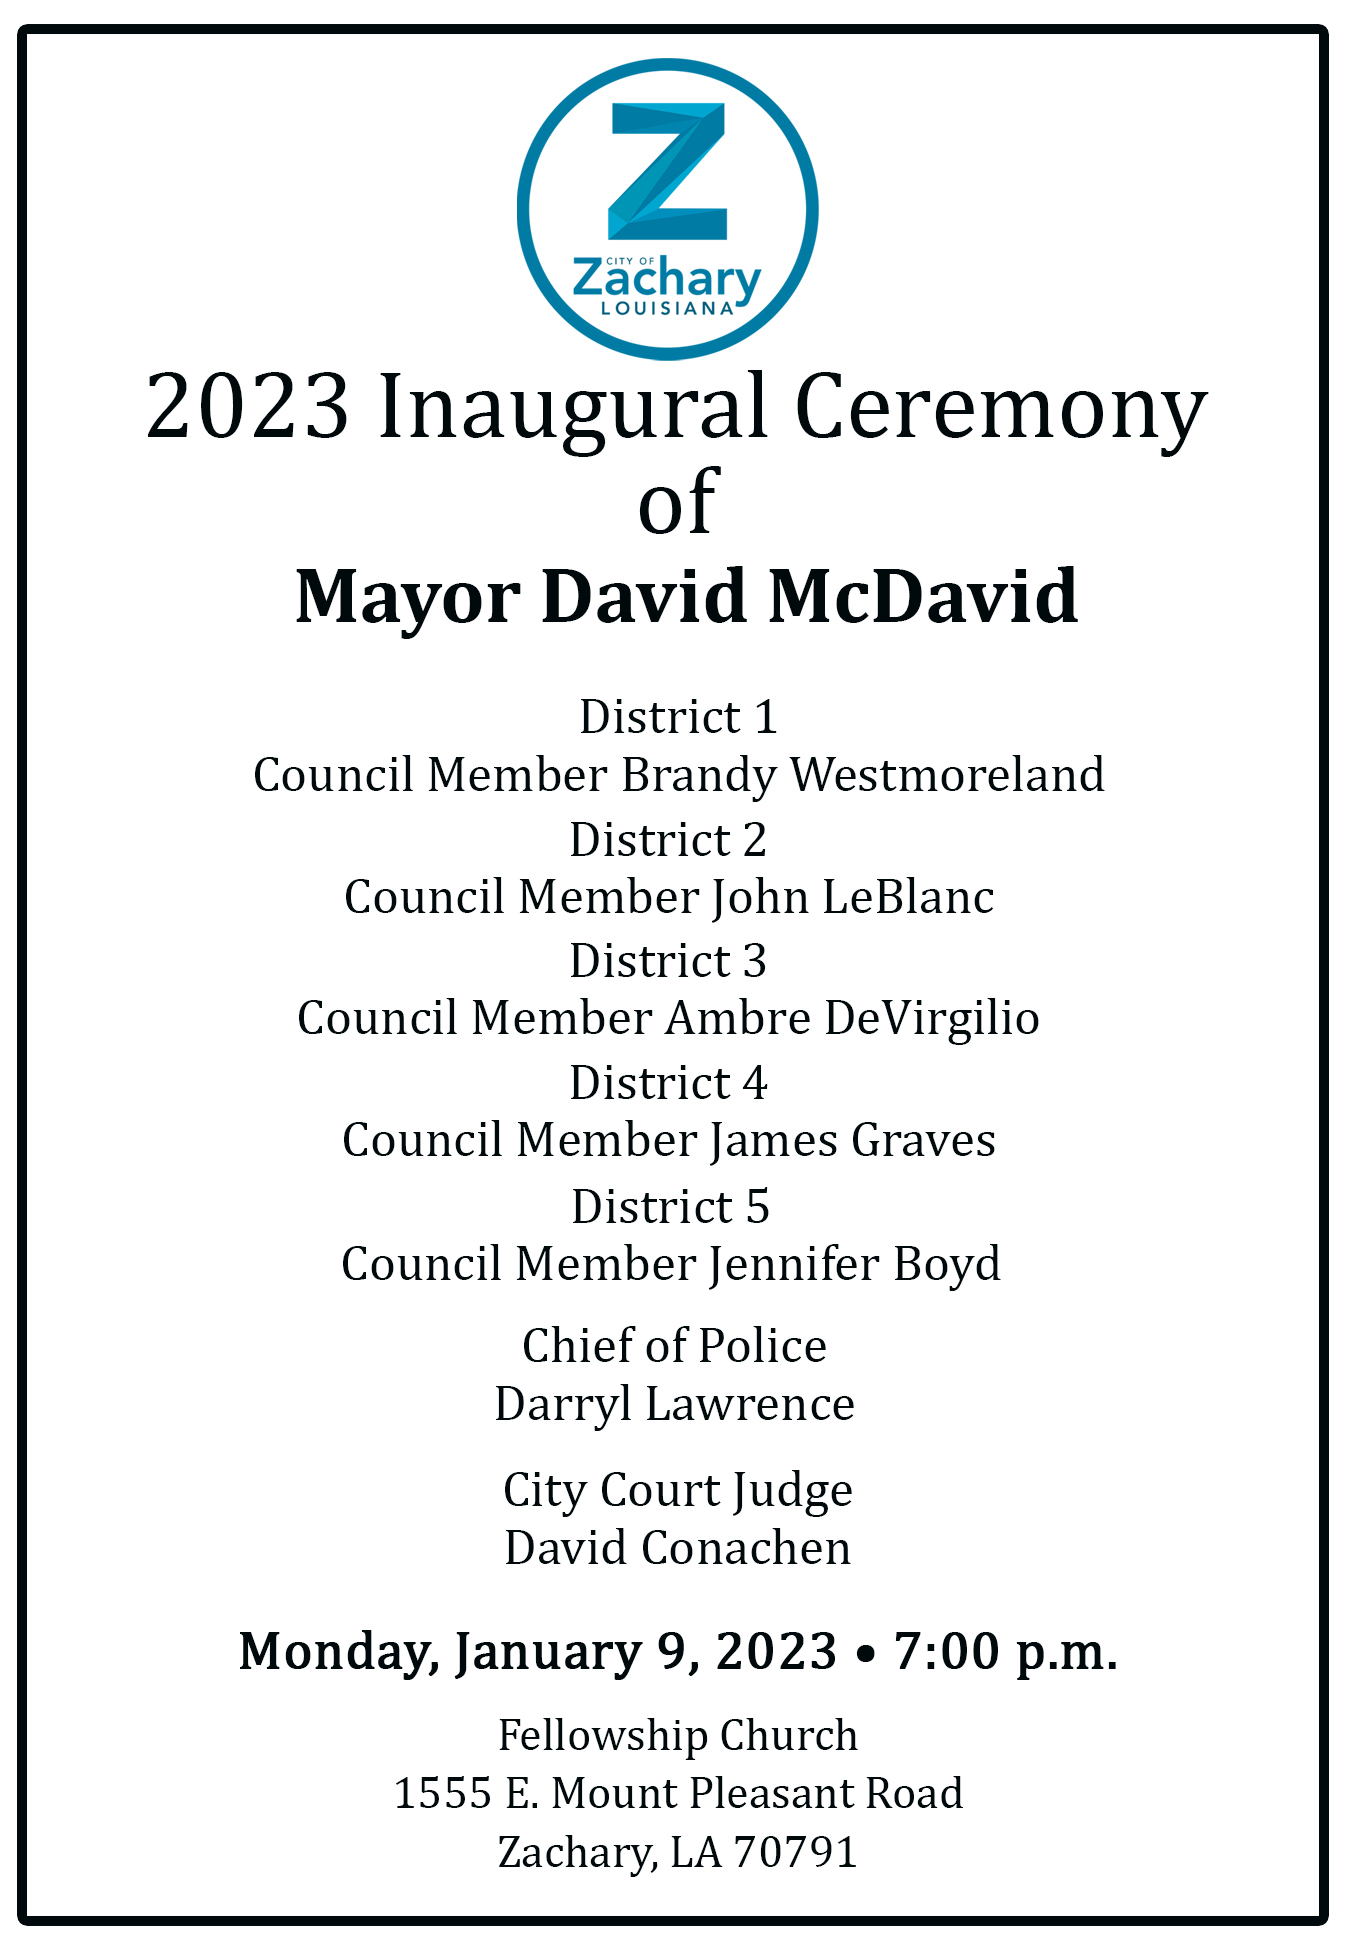 2023 Inaugural Ceremony Live Streaming Available 1/9 at 7PM